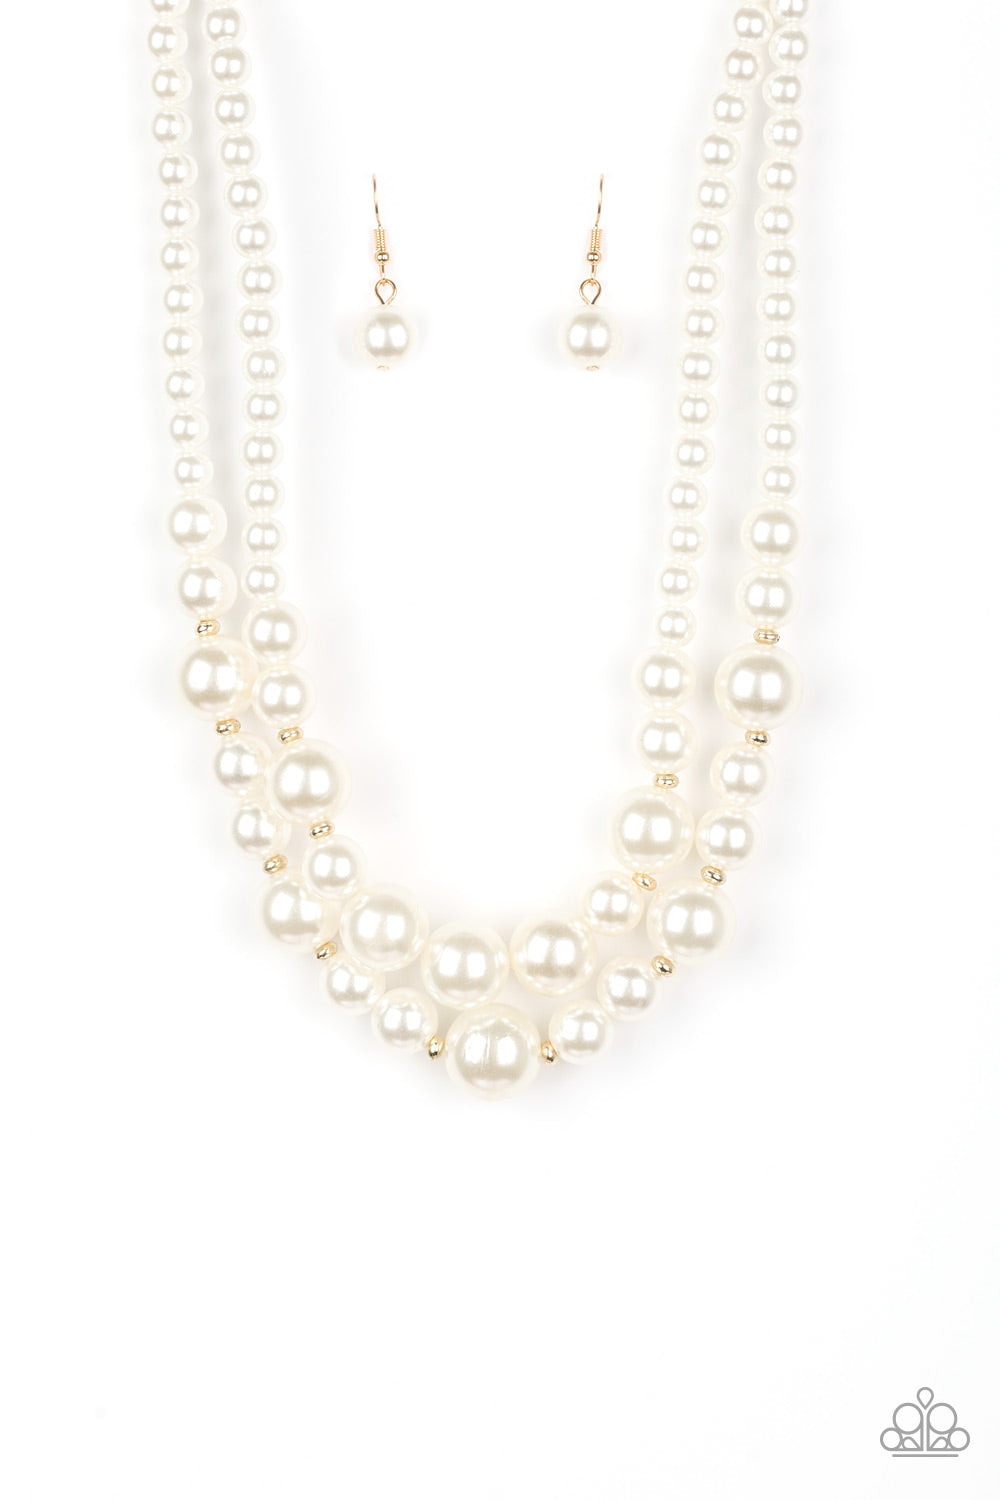 Infused with dainty gold accents, classic white pearls layer below the collar in a timeless fashion. Features an adjustable clasp closure